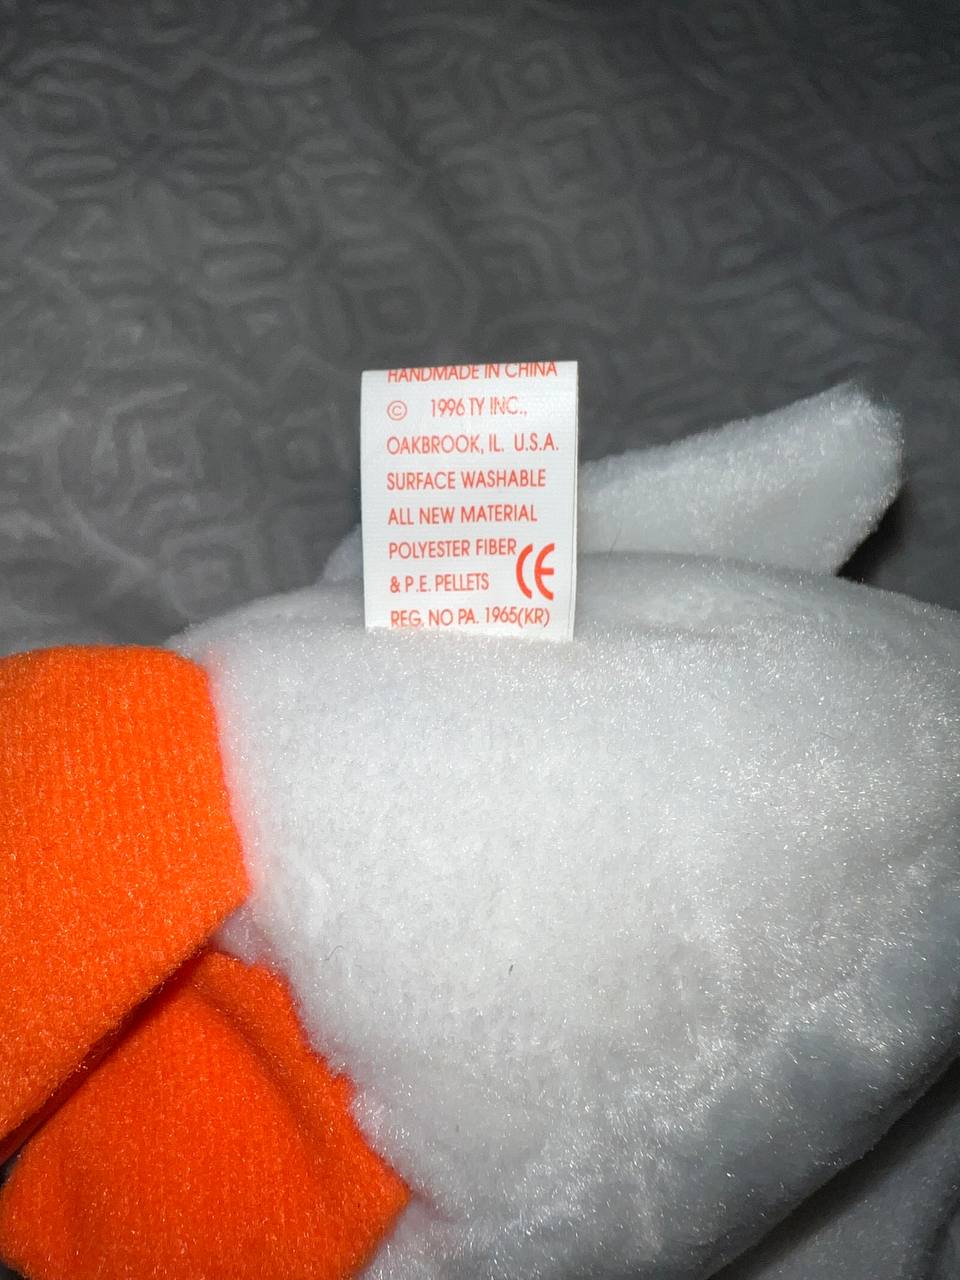 *RARE* MINT Gracie Beanie Baby 1996 With Tag